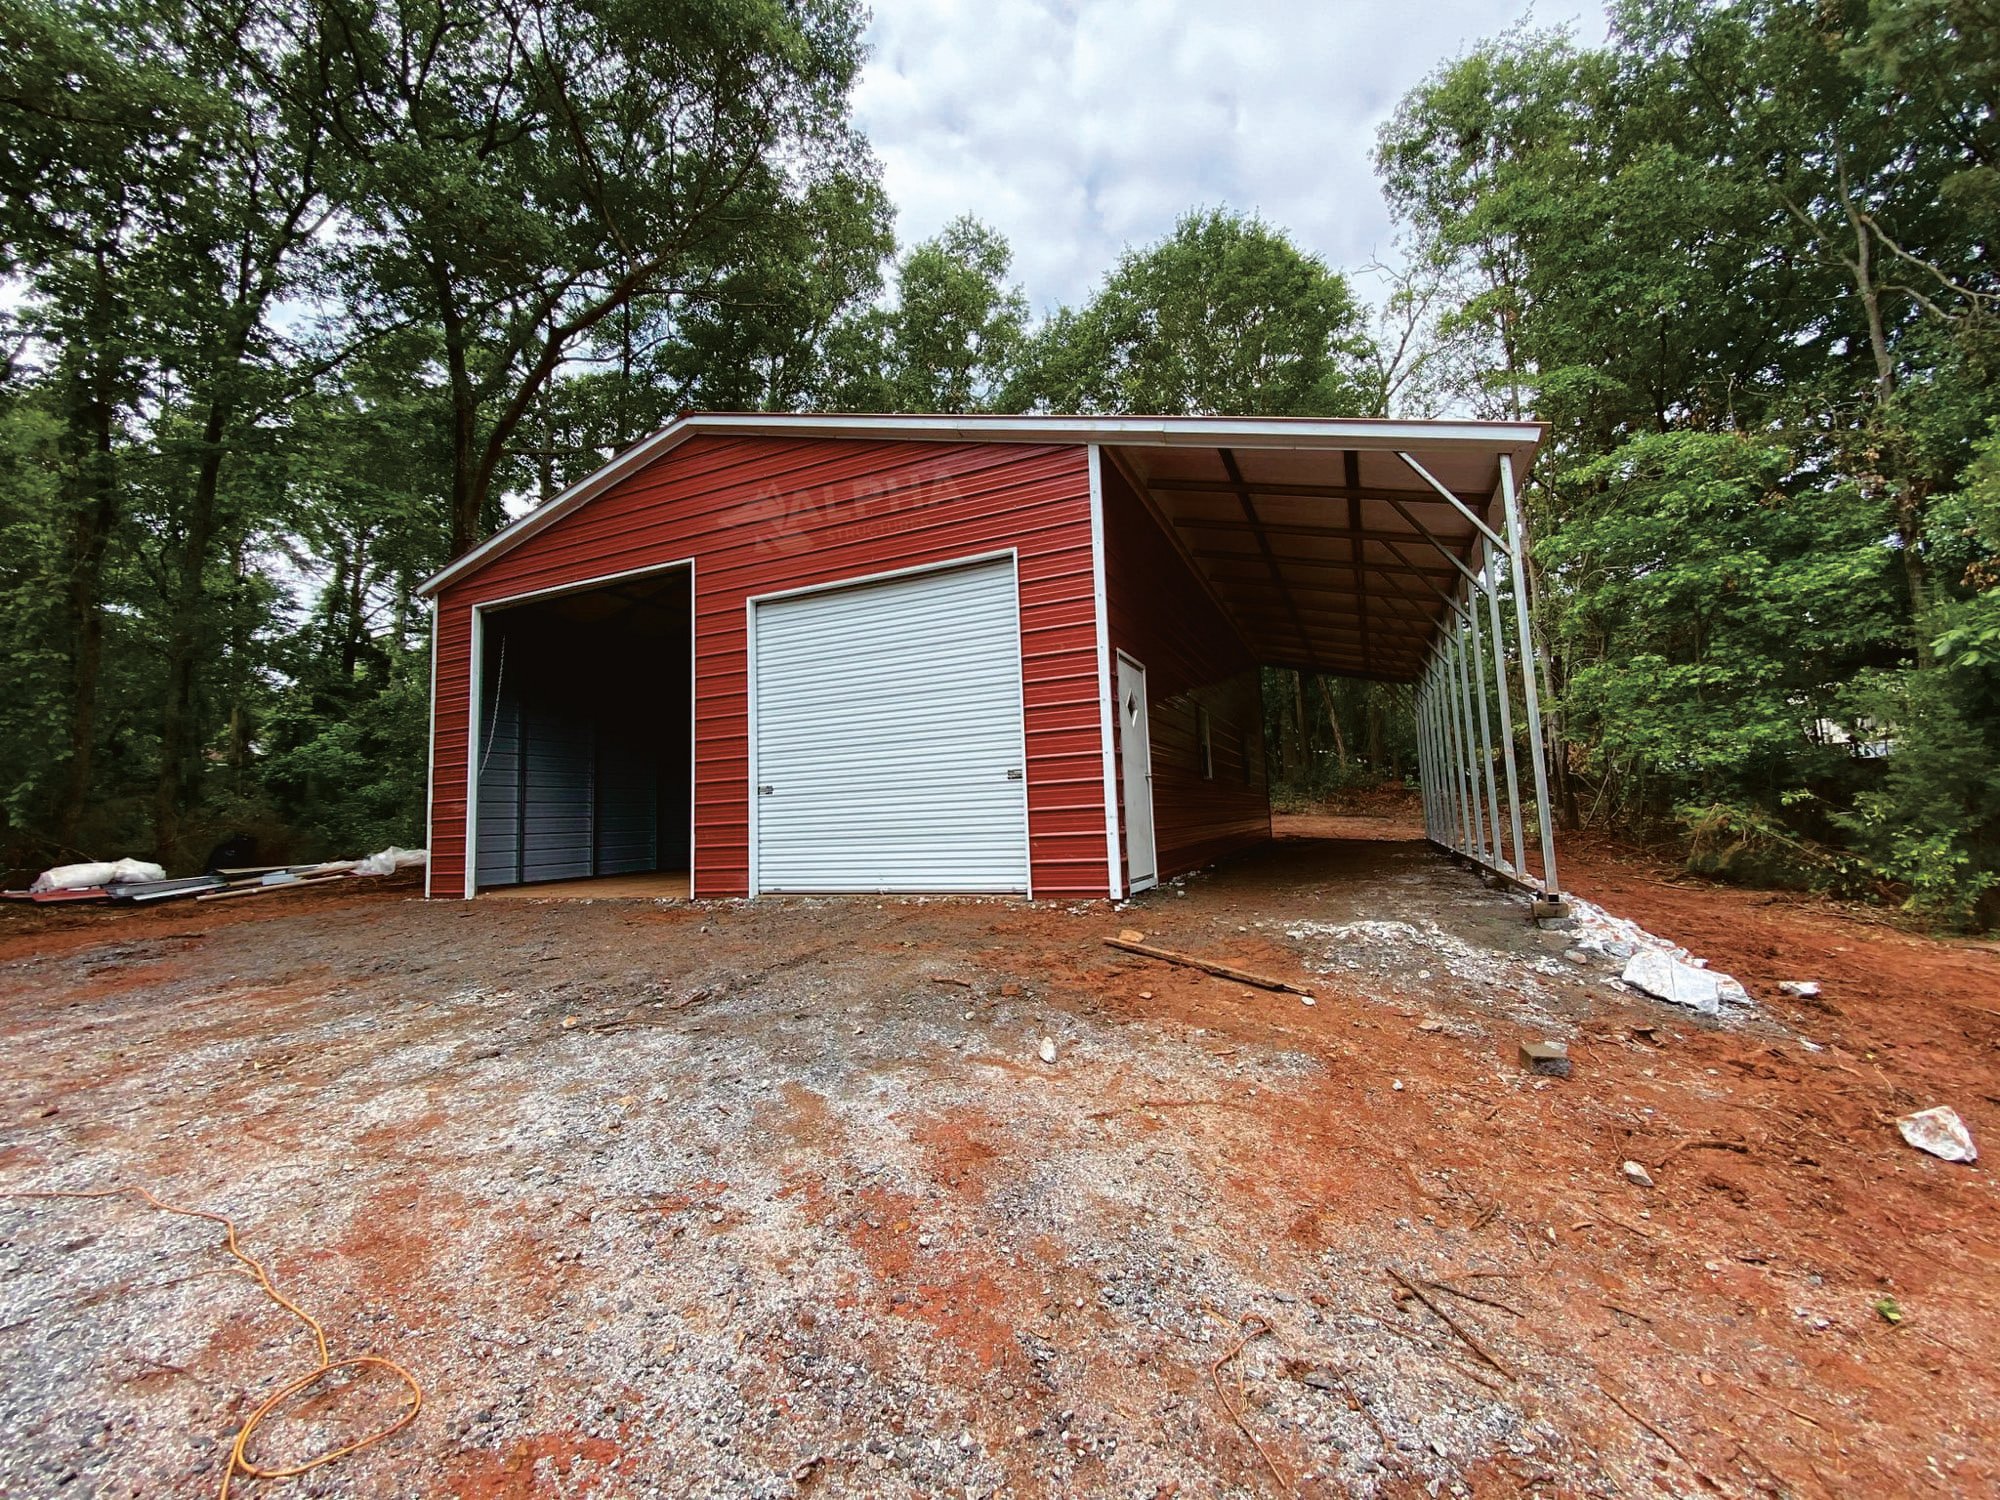 How Much Does A Metal Barn Cost